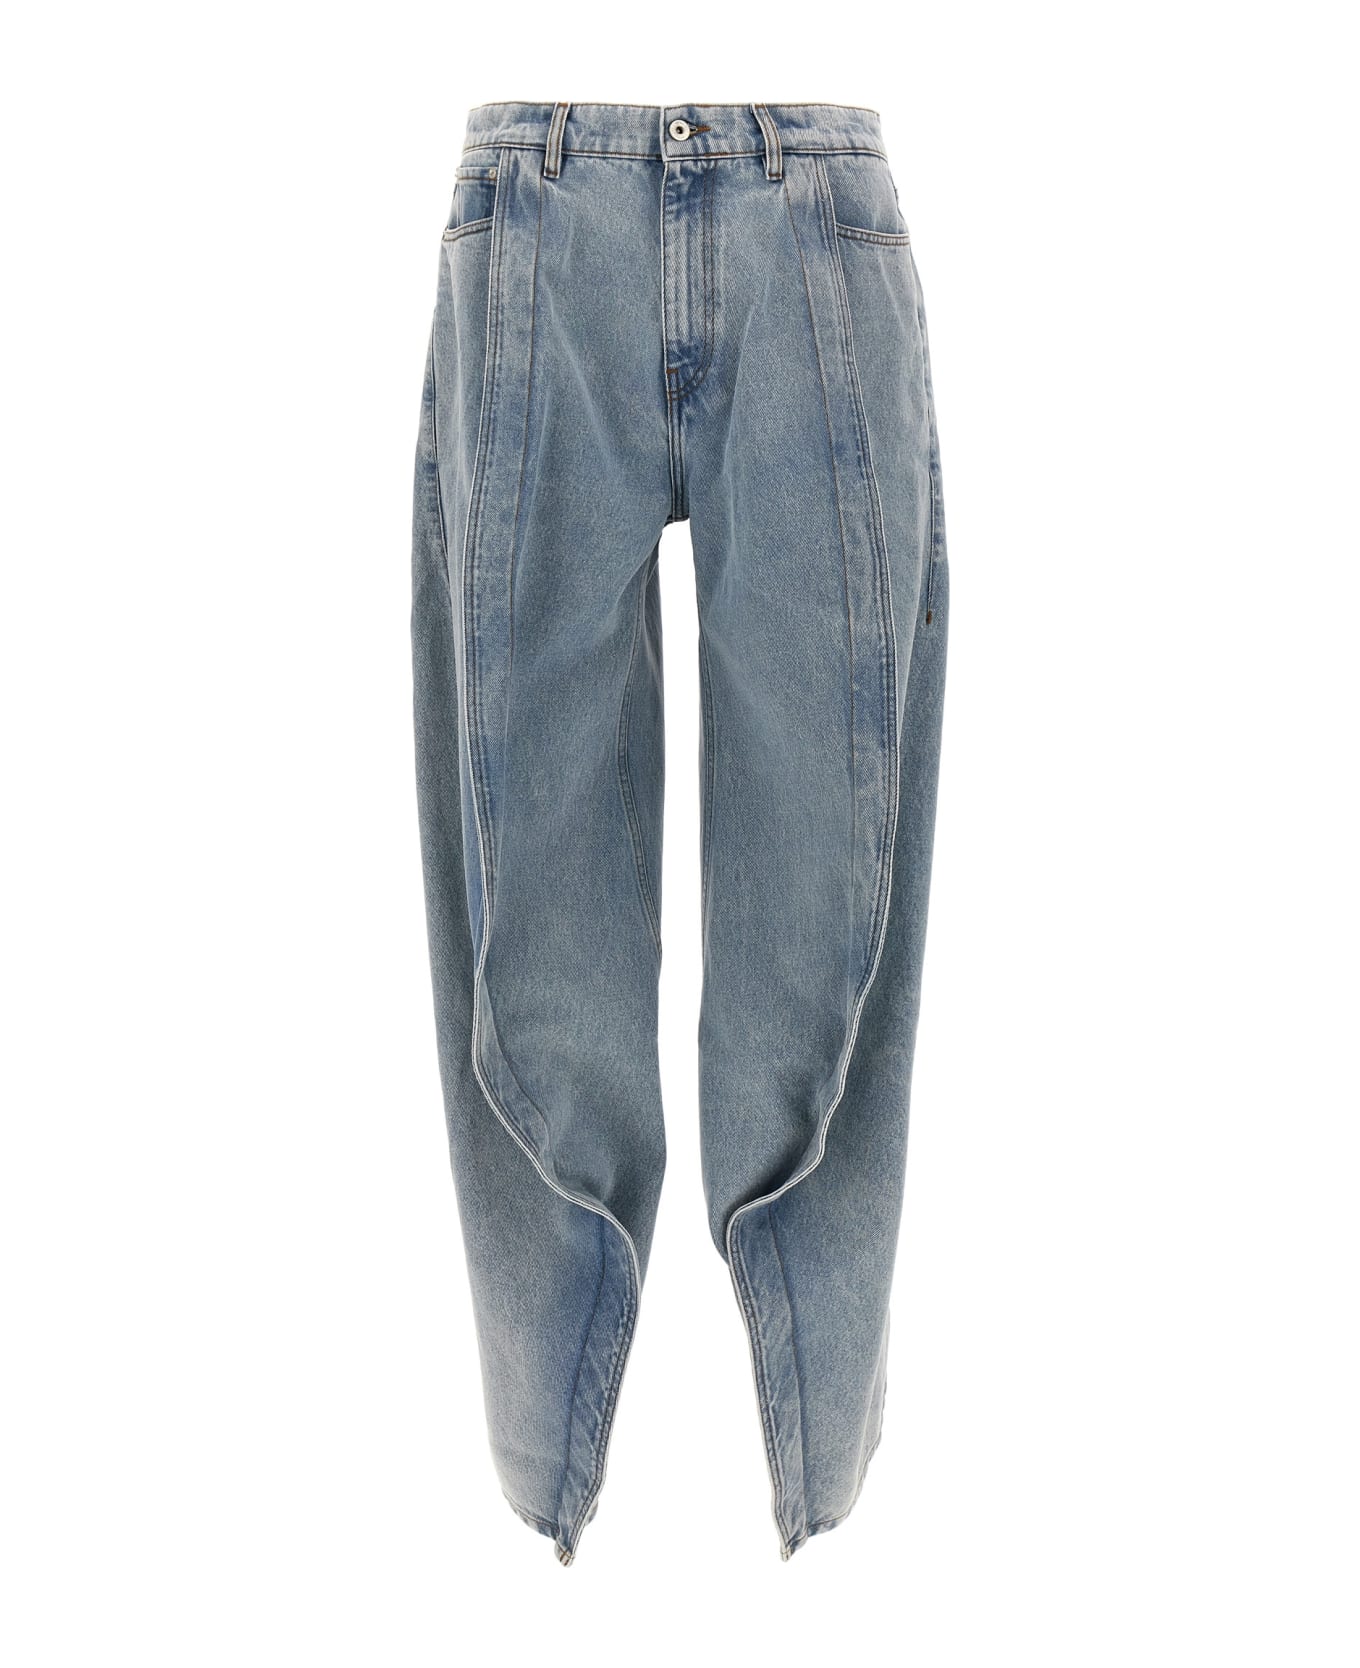 Y/Project 'evergreen Banana' Jeans - Light Blue